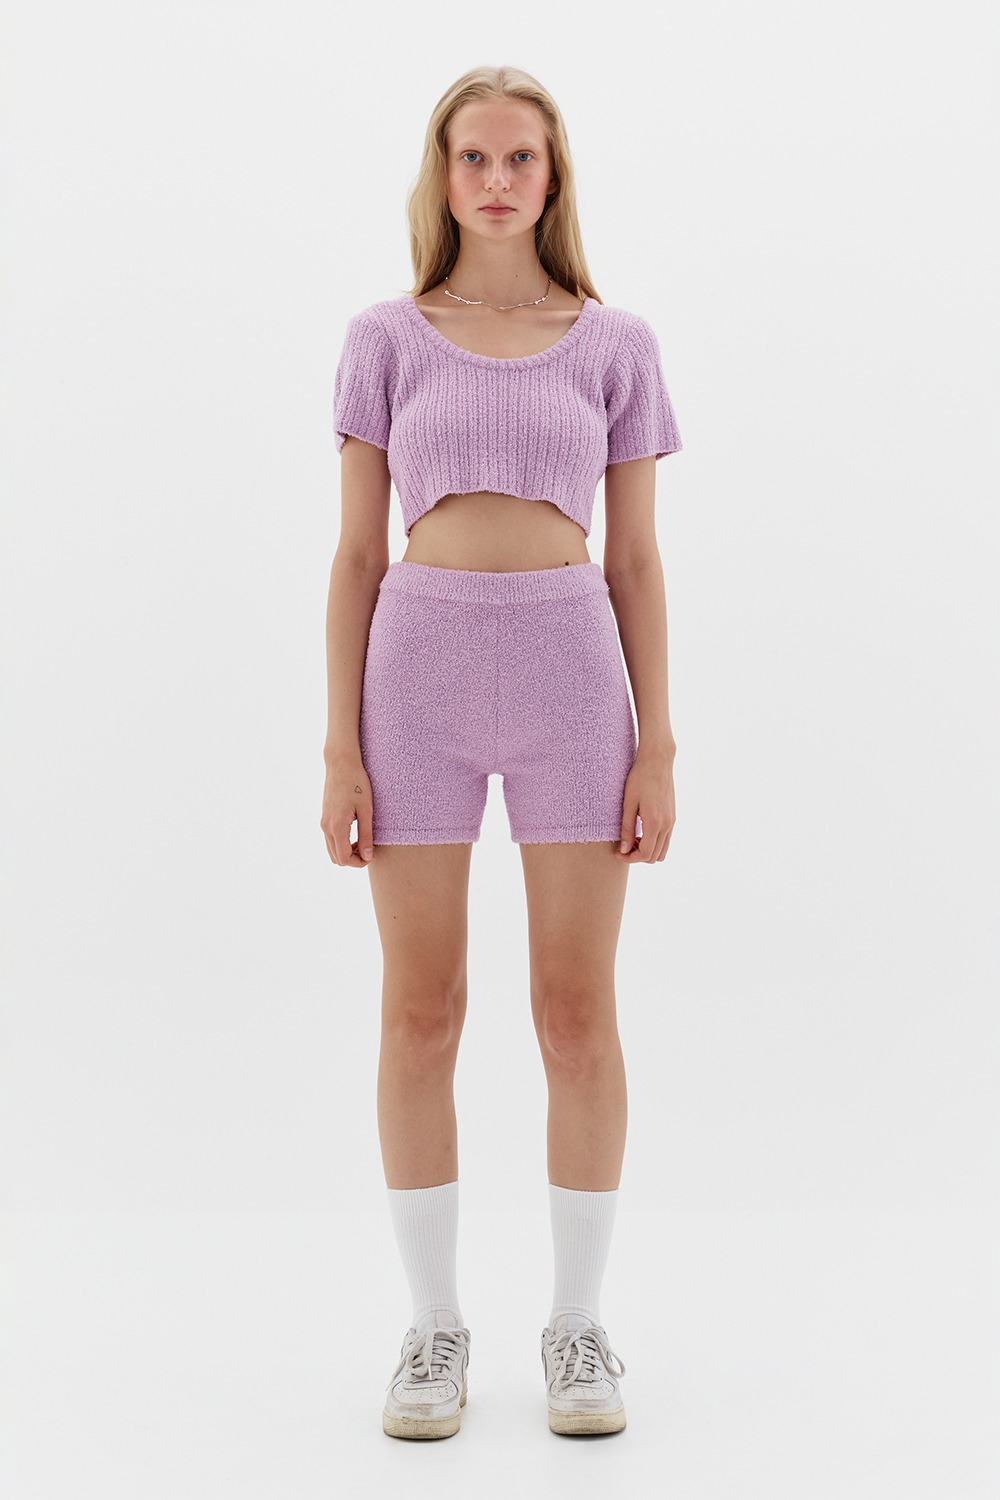 FLUFFY KNITTED TOP - VIOLET